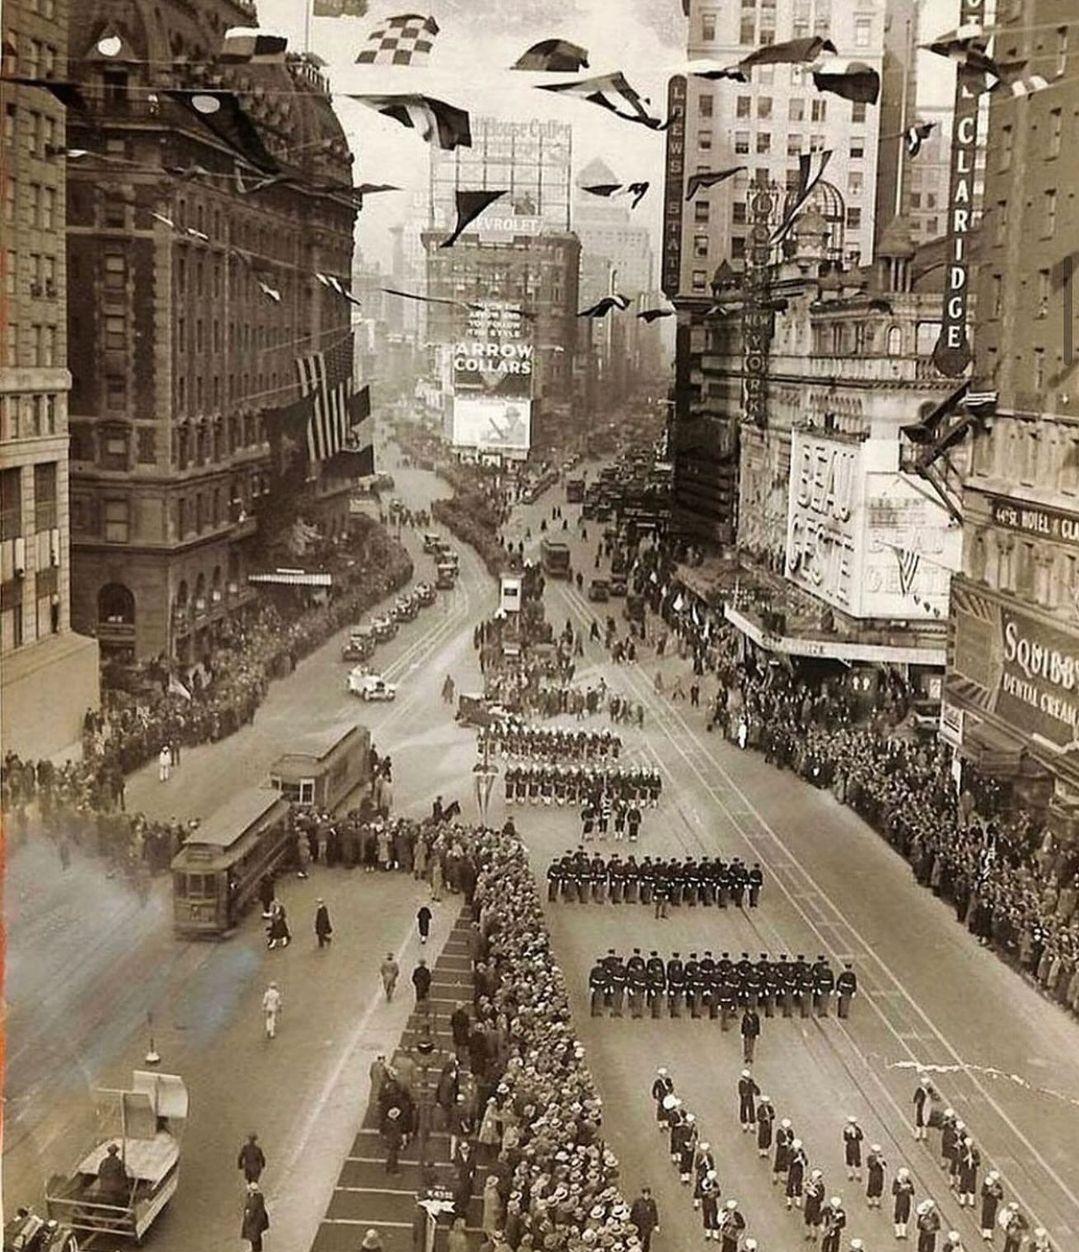 A parade celebrating Broadway's 300th anniversary in 1926.jpeg